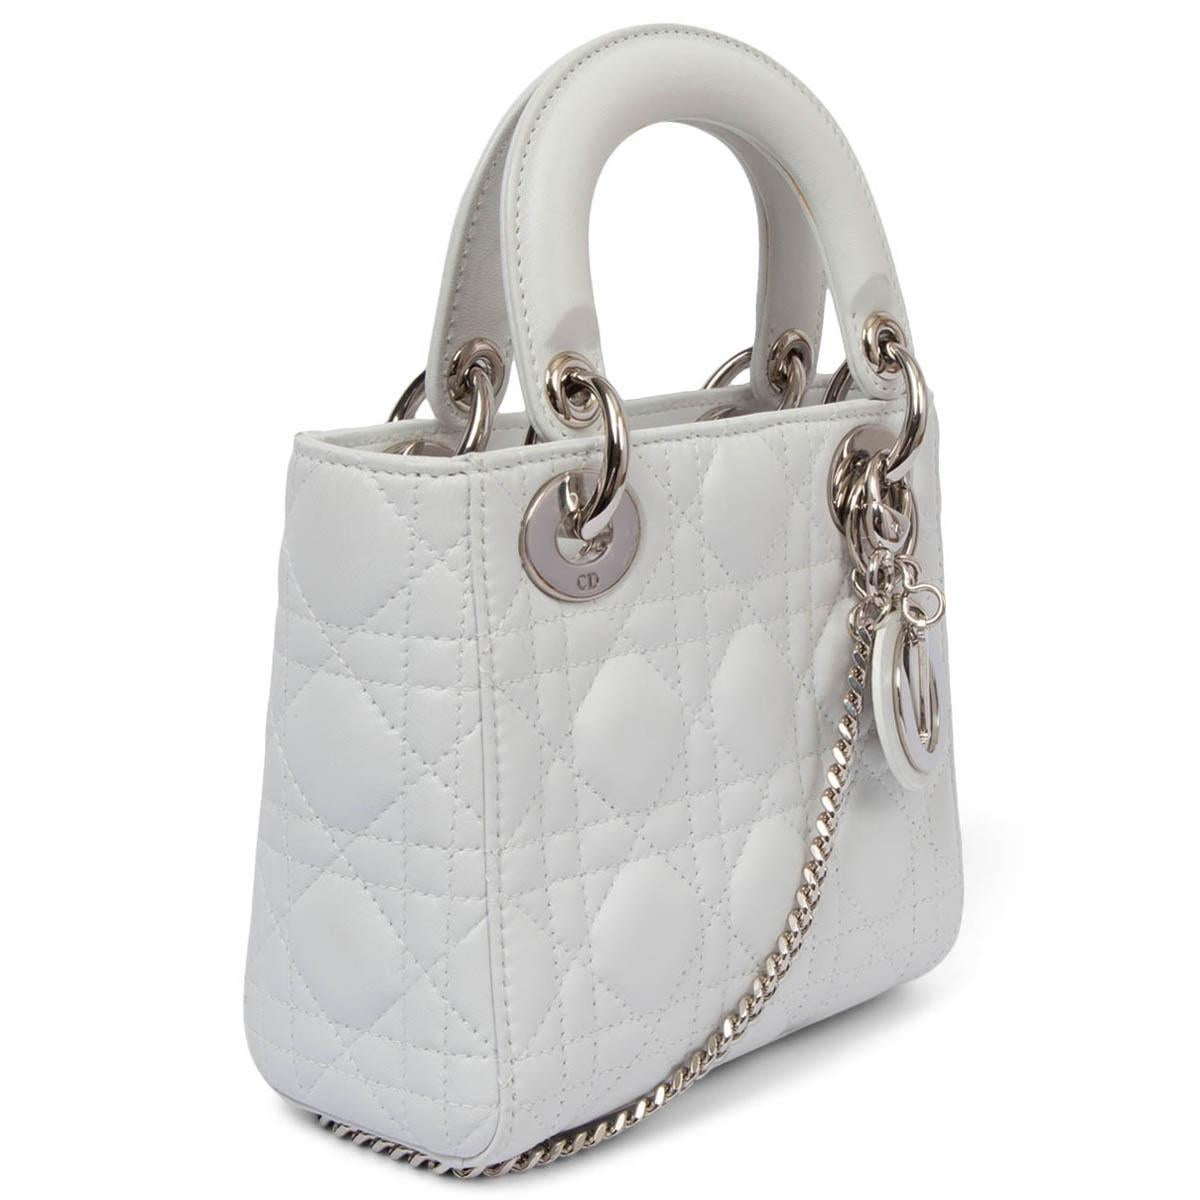 100% authentic Christian Dior Mini Lady Dior shoulder bag in white smooth calfskin with signature Cannage quilting. Silver-finish metal hardware and the 'D.I.O.R.' charms complete and illuminate its silhouette. Featuring a thin, removable leather